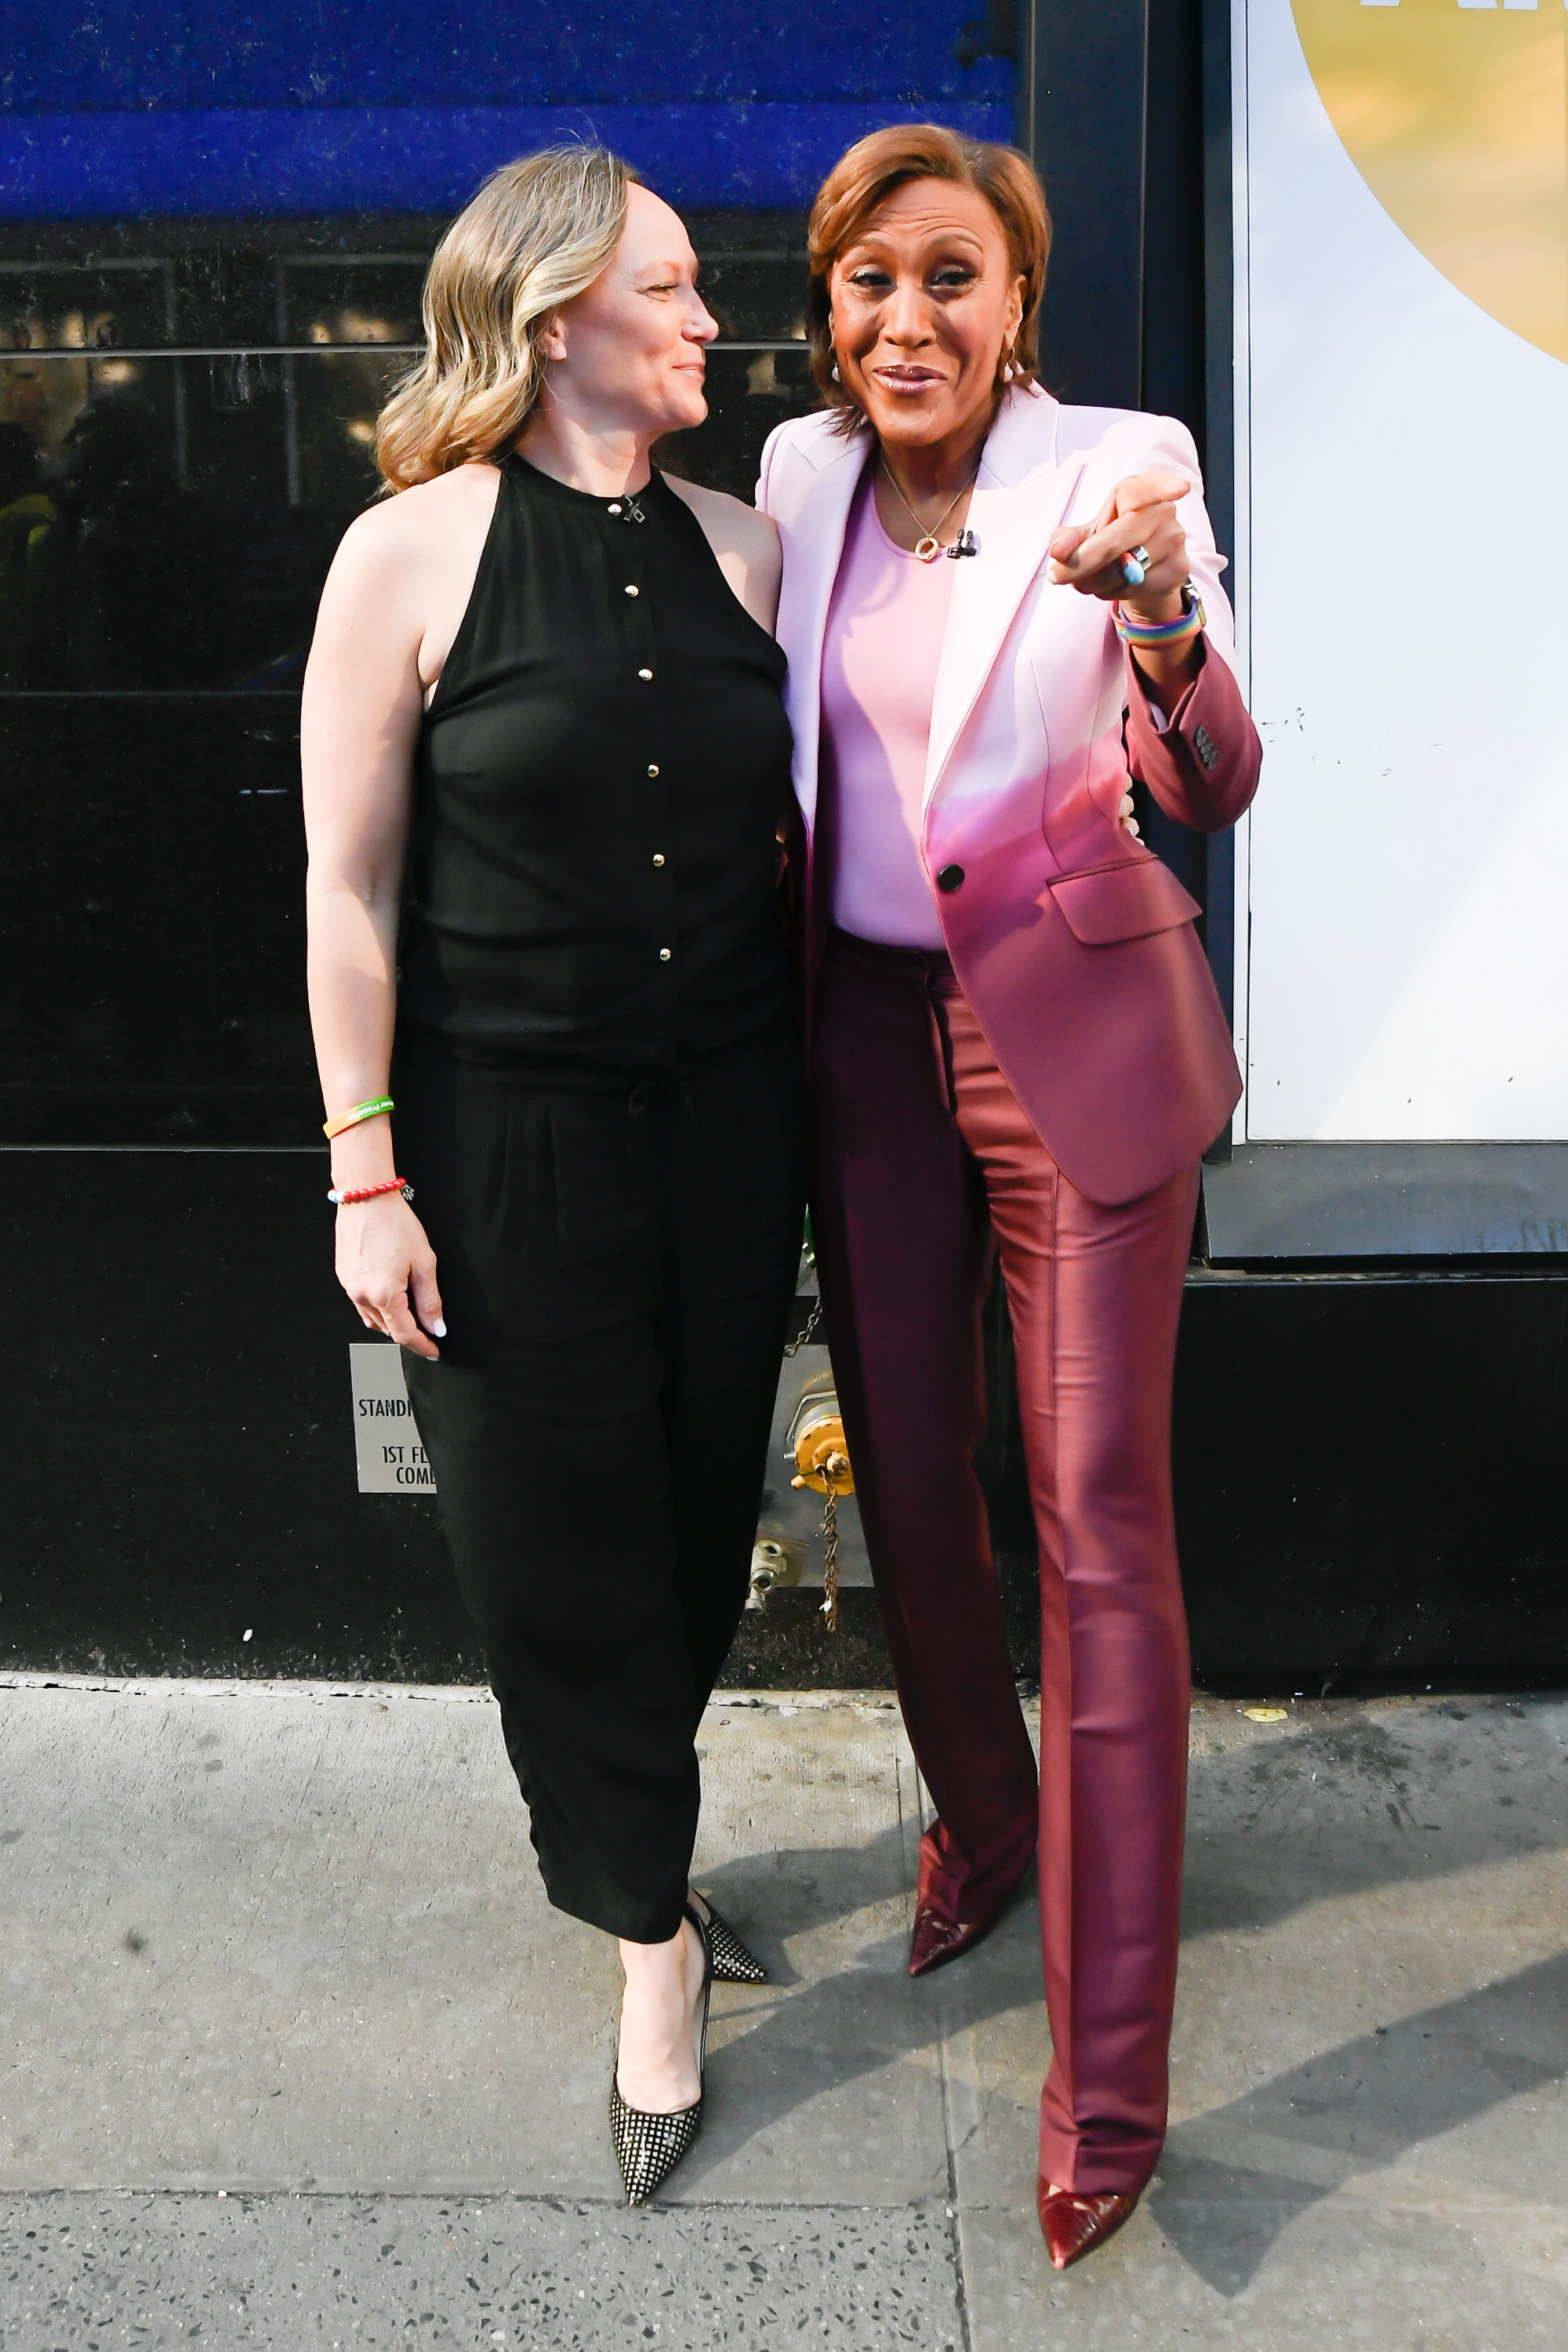 Robin Roberts and Amber Laign stand on a sidewalk together